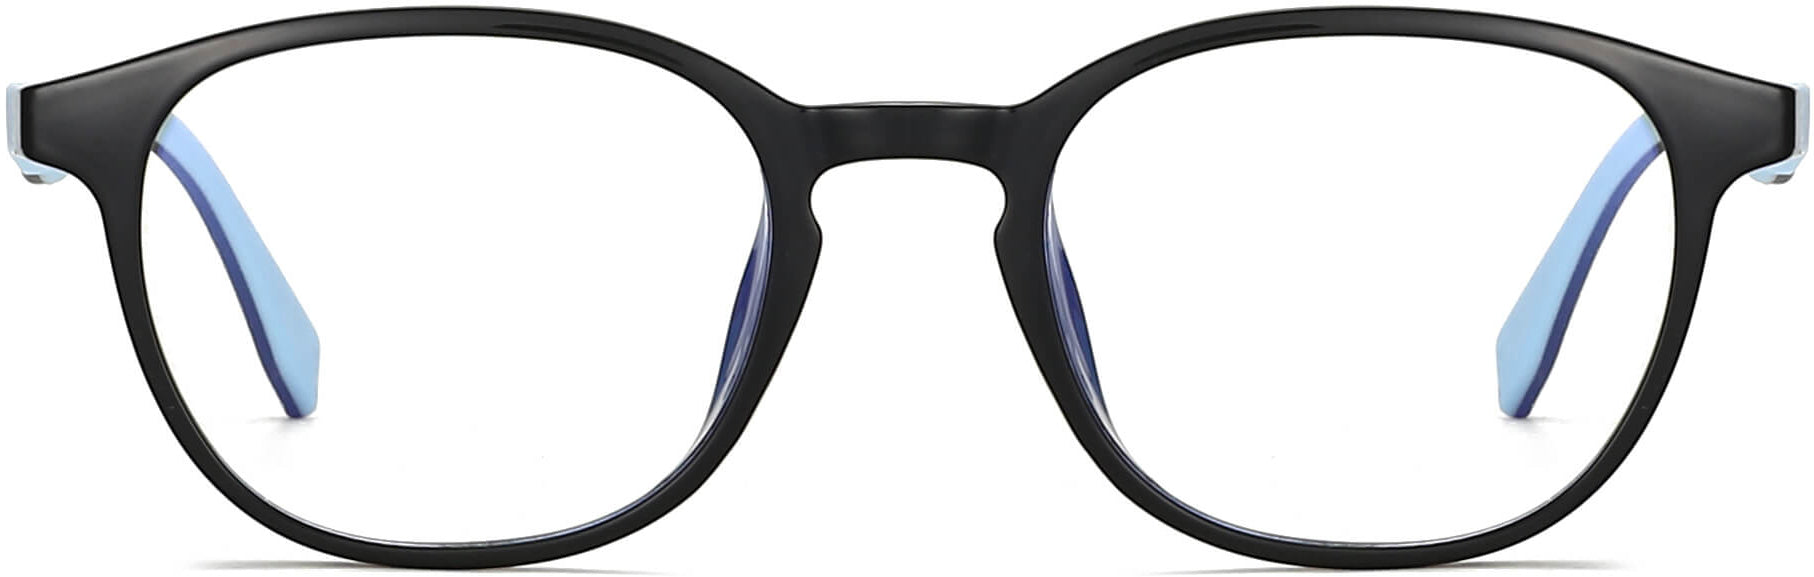 Ryder Round Black Eyeglasses from ANRRI, front view